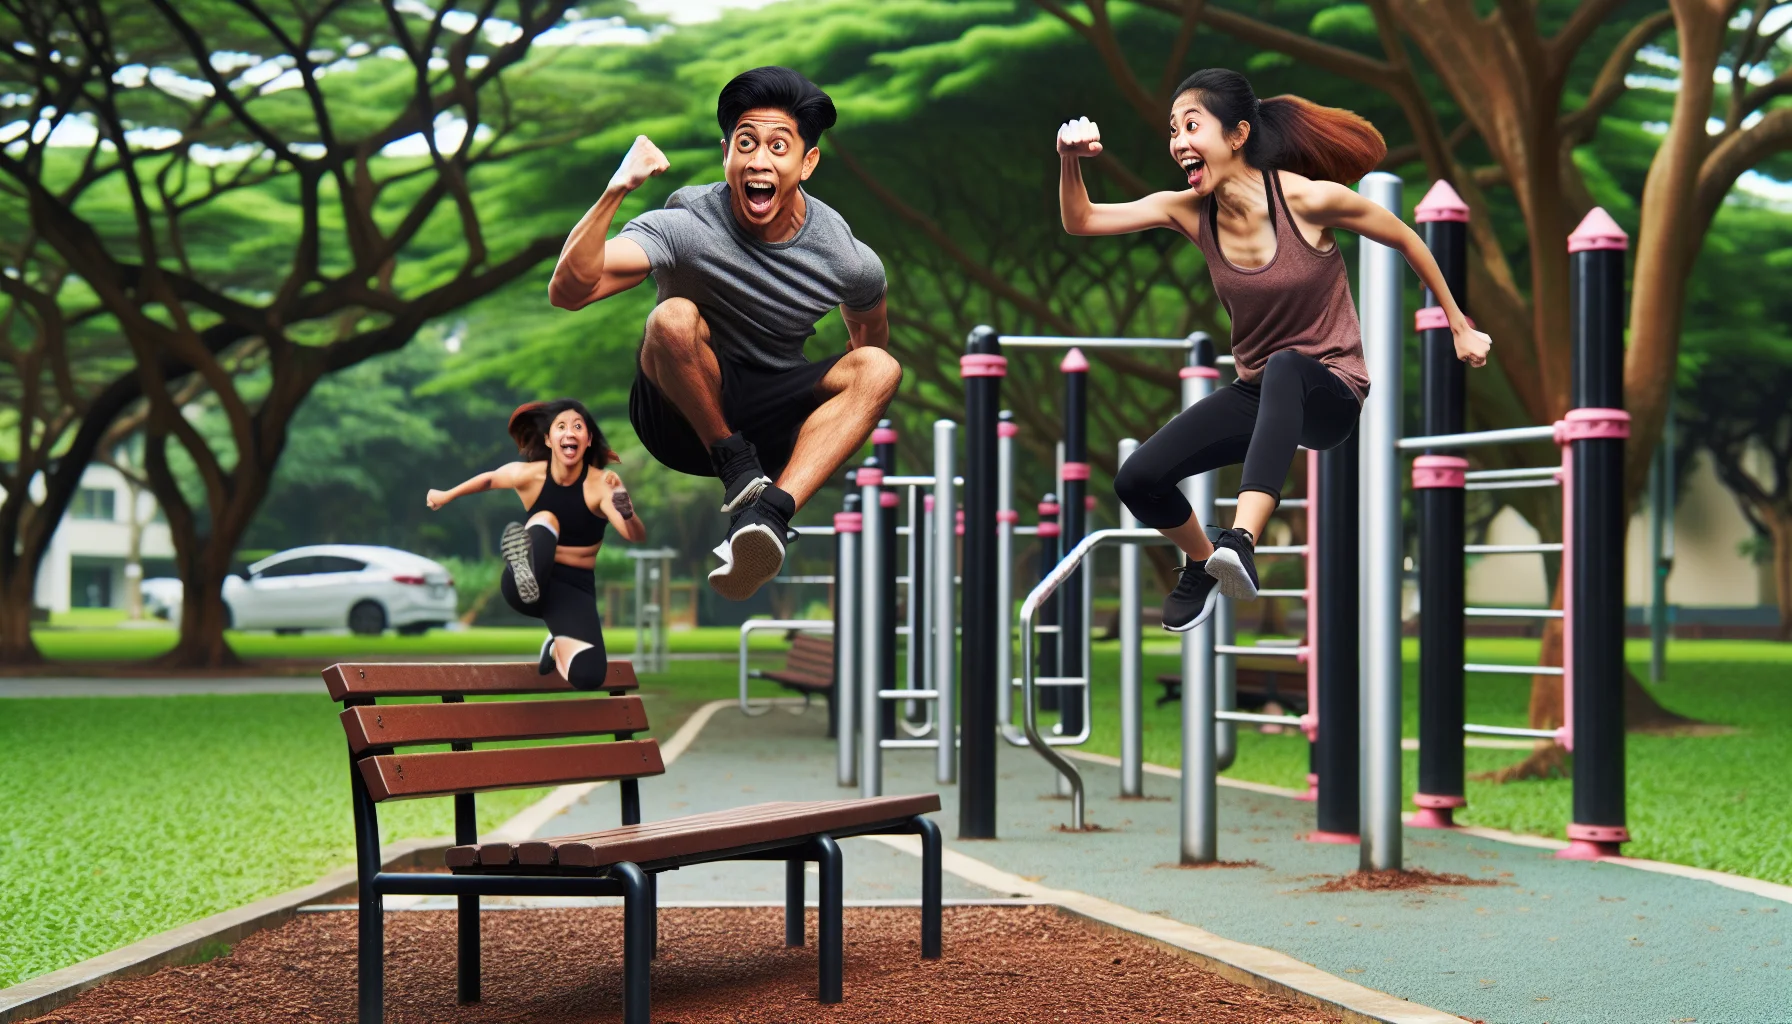 A humorous and energetic outdoor scene featuring a South Asian male and a Hispanic female, both starting to master Parkour, a sport for agility and speed. They're in a public park surrounded by exercise equipment ready to demonstrate their newfound skills. The South Asian male is in the middle of an impressive leap over a park bench, while the Hispanic female, just behind him, is about to vault over a rail. The expressions on their faces are a perfect balance of rigor and amusement, making this a playful visual invitation for others to take up the exercise.